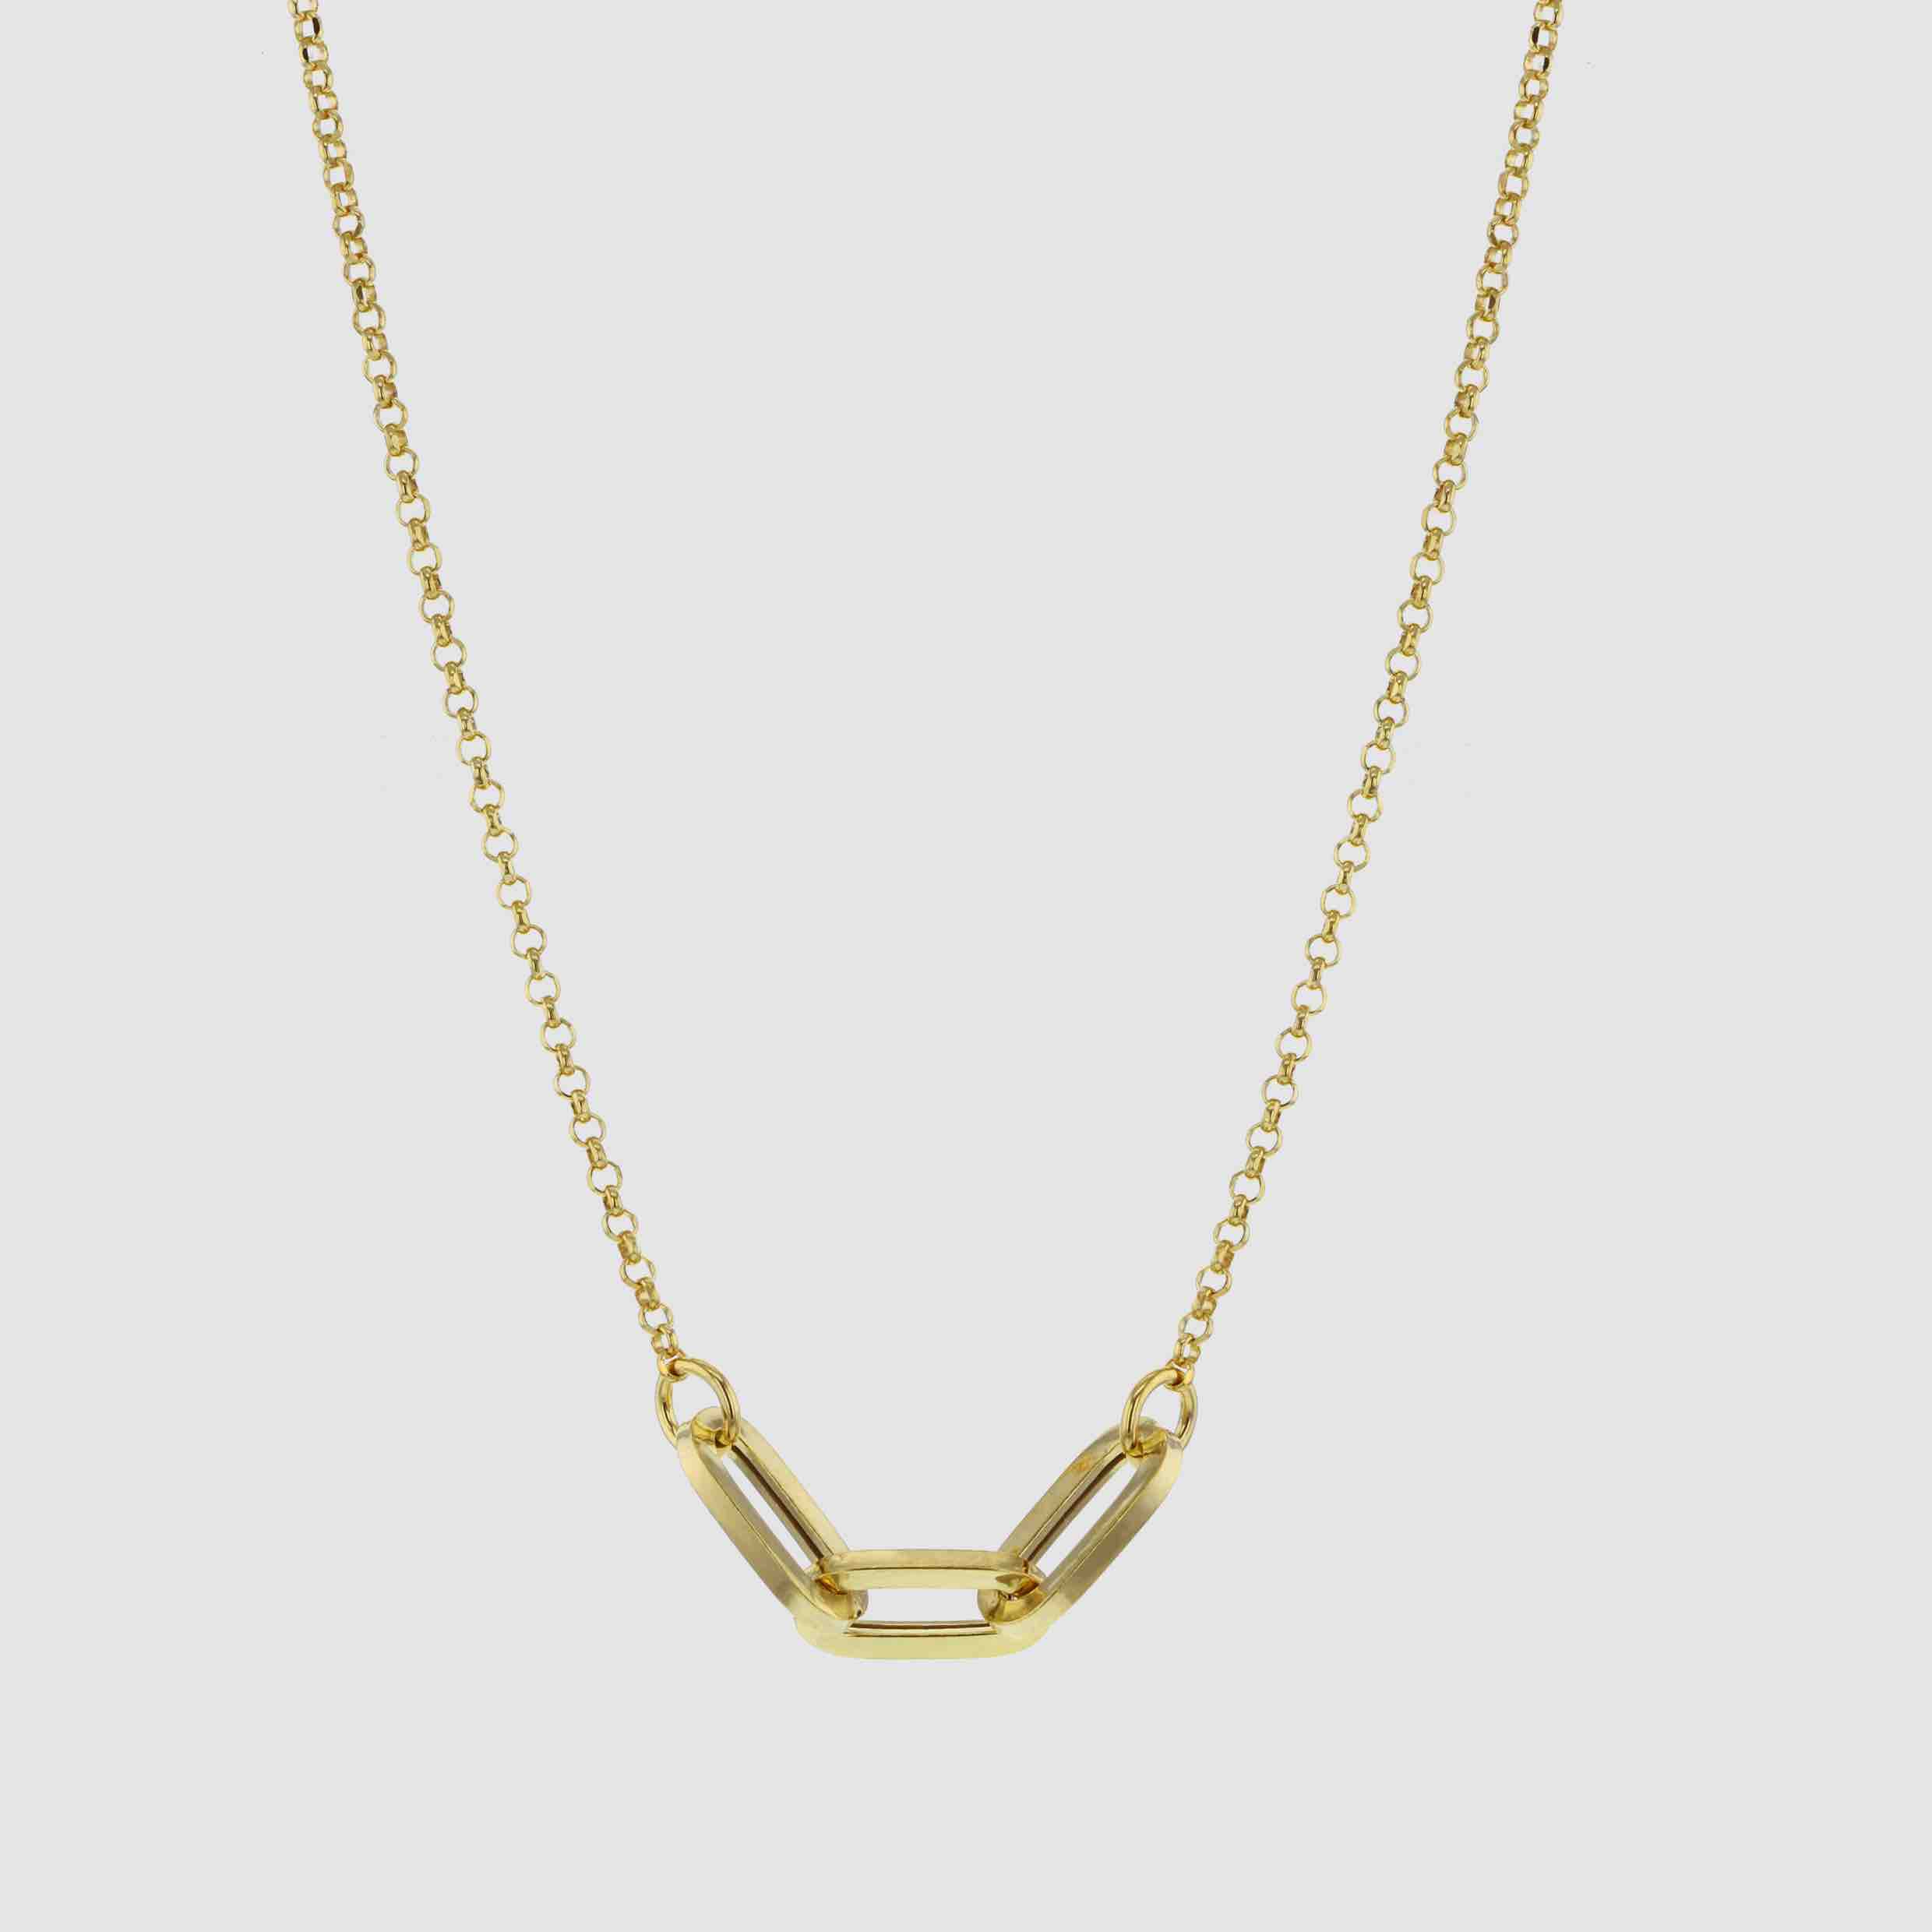 Fancy necklace gold from Hasla Jewelry made in gold plated recycled silver. norske designsmykker